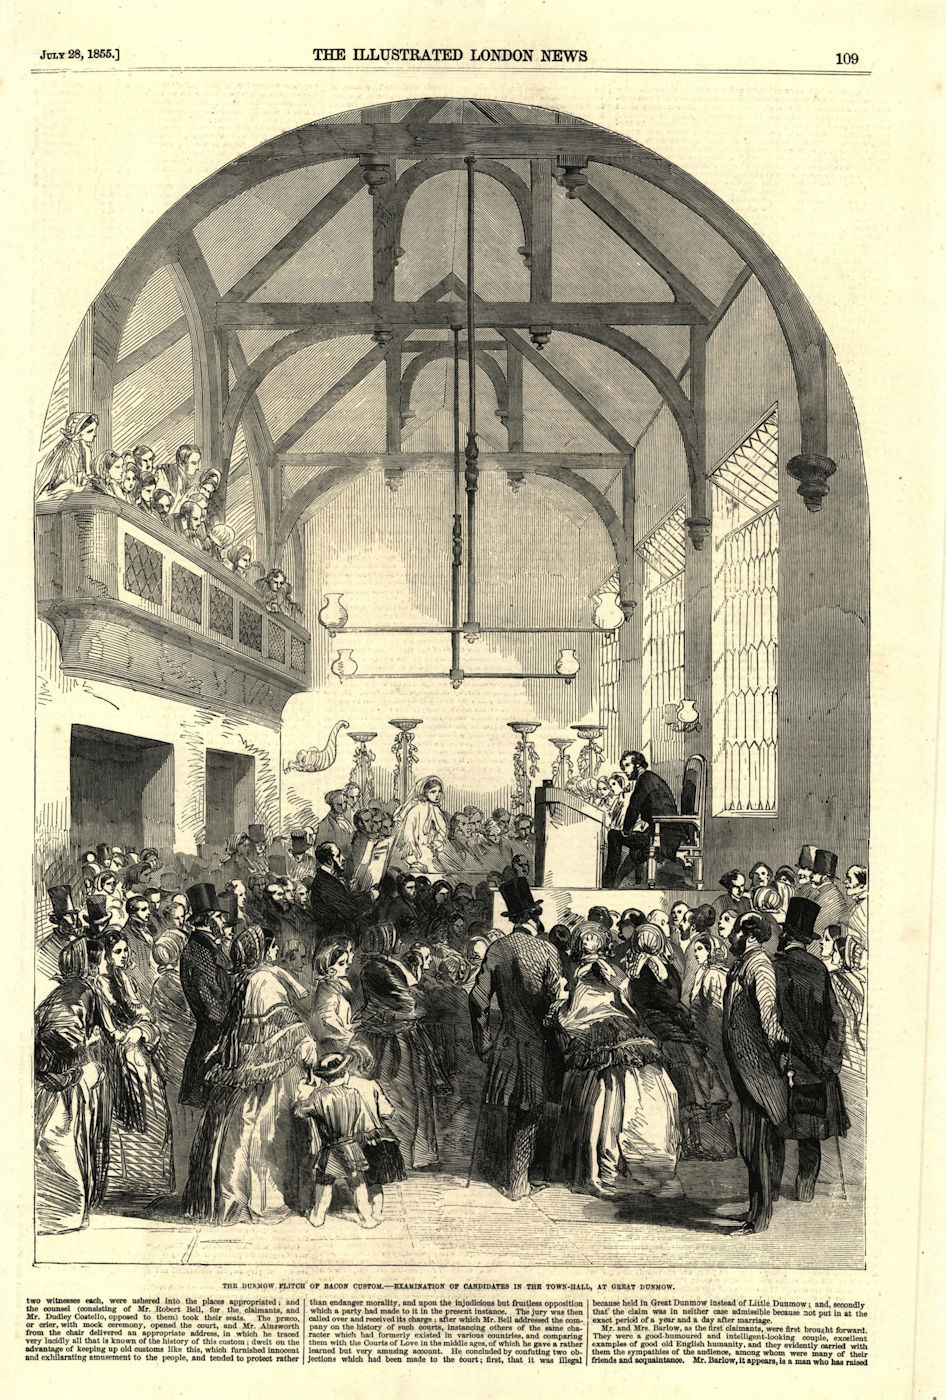 Flitch of bacon custom. Examination of candidates, Great Dunmow town hall 1855